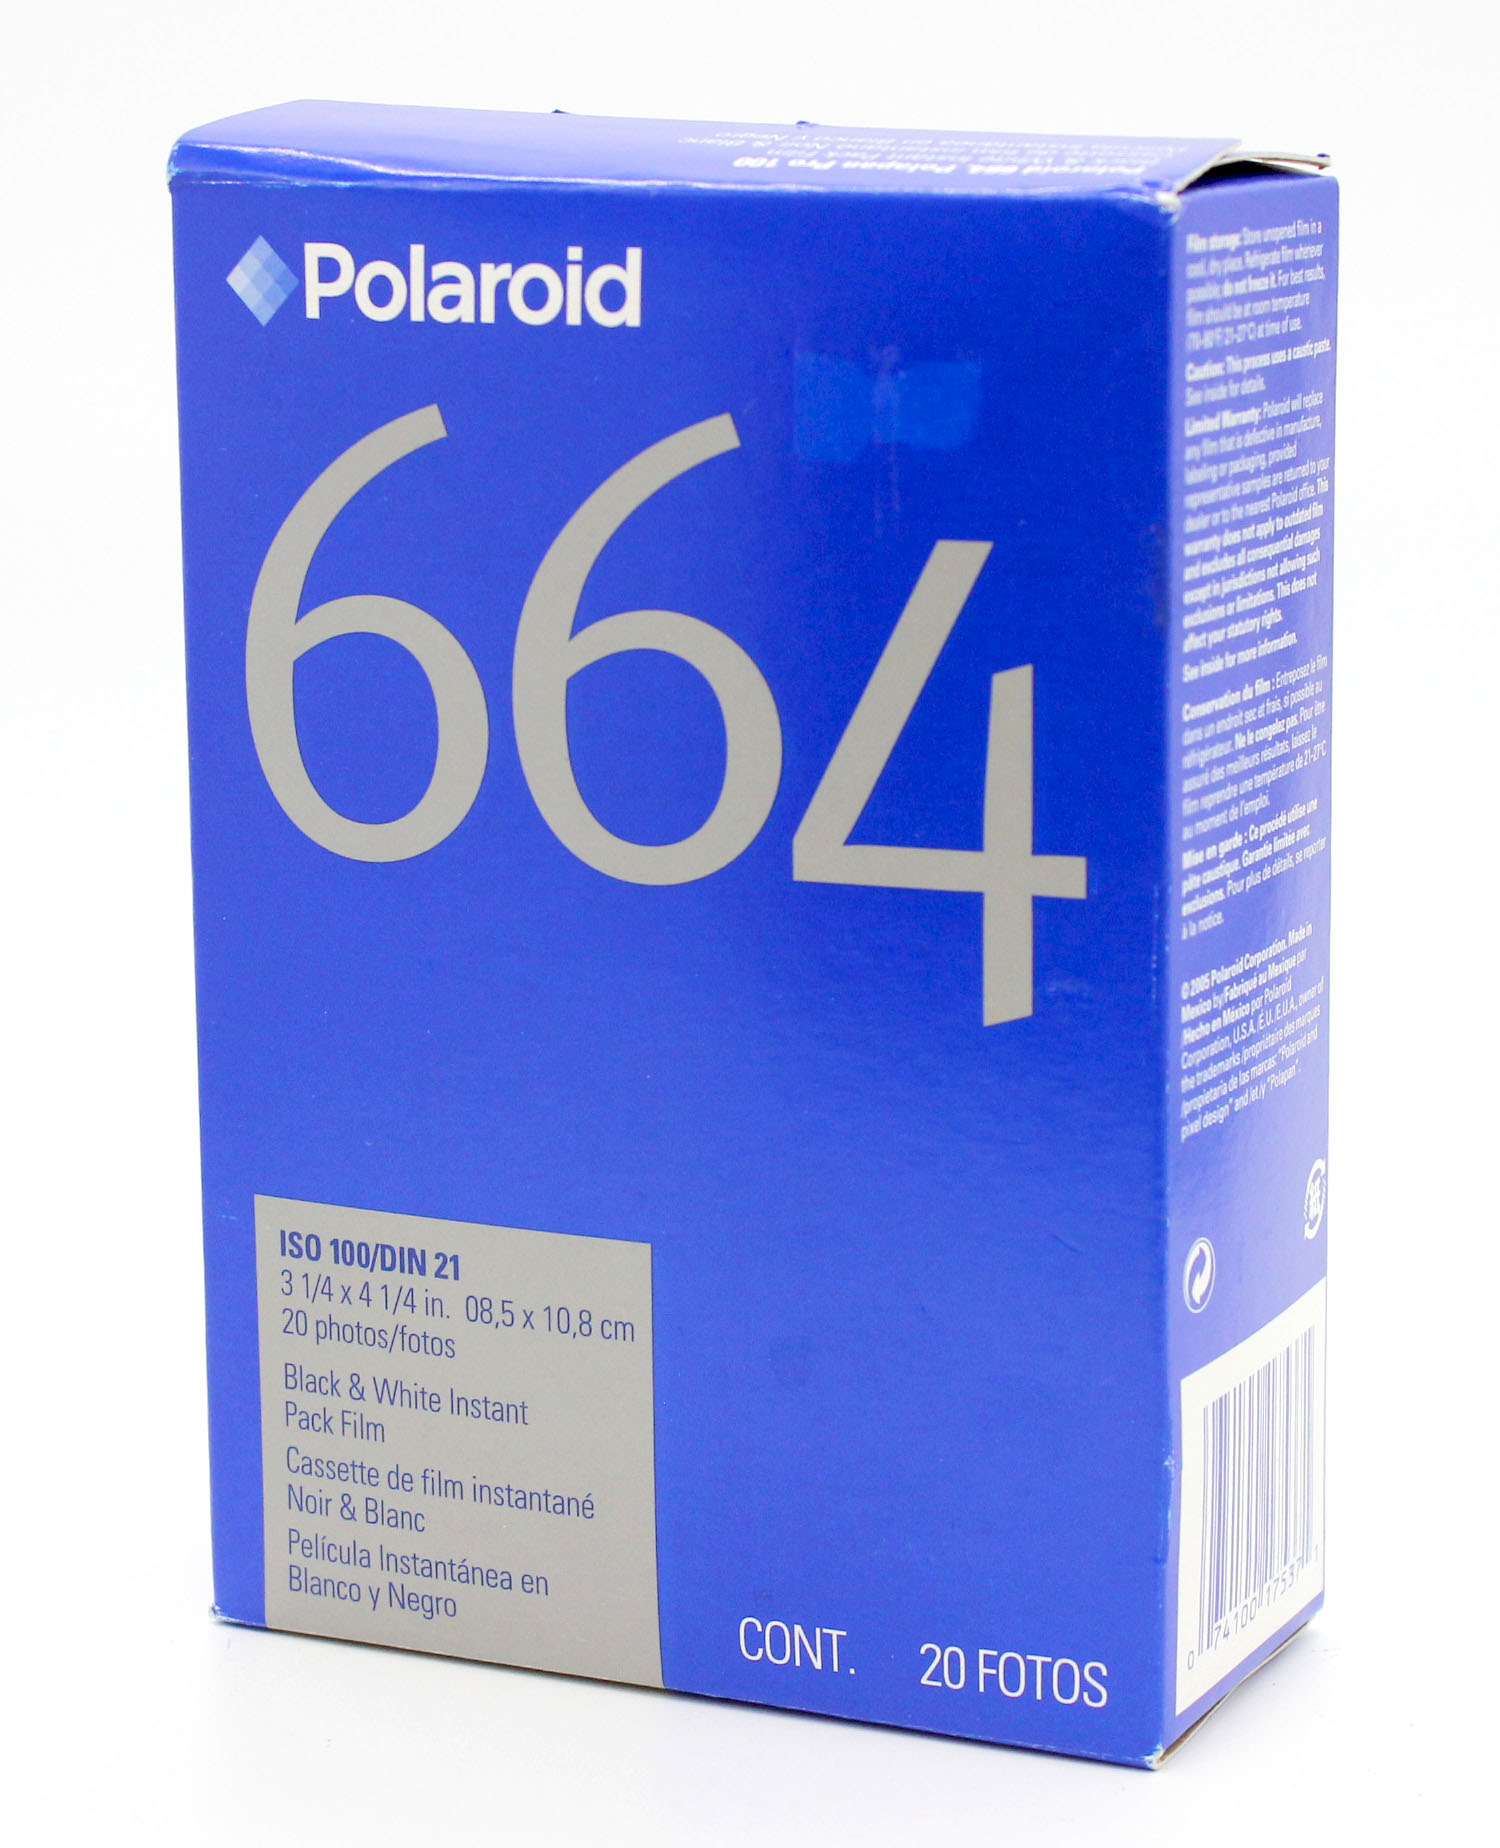  Polaroid 664 B&W Black & White Instant Pack Film 20 Fotos Expired 04/2009 from Japan Photo 0